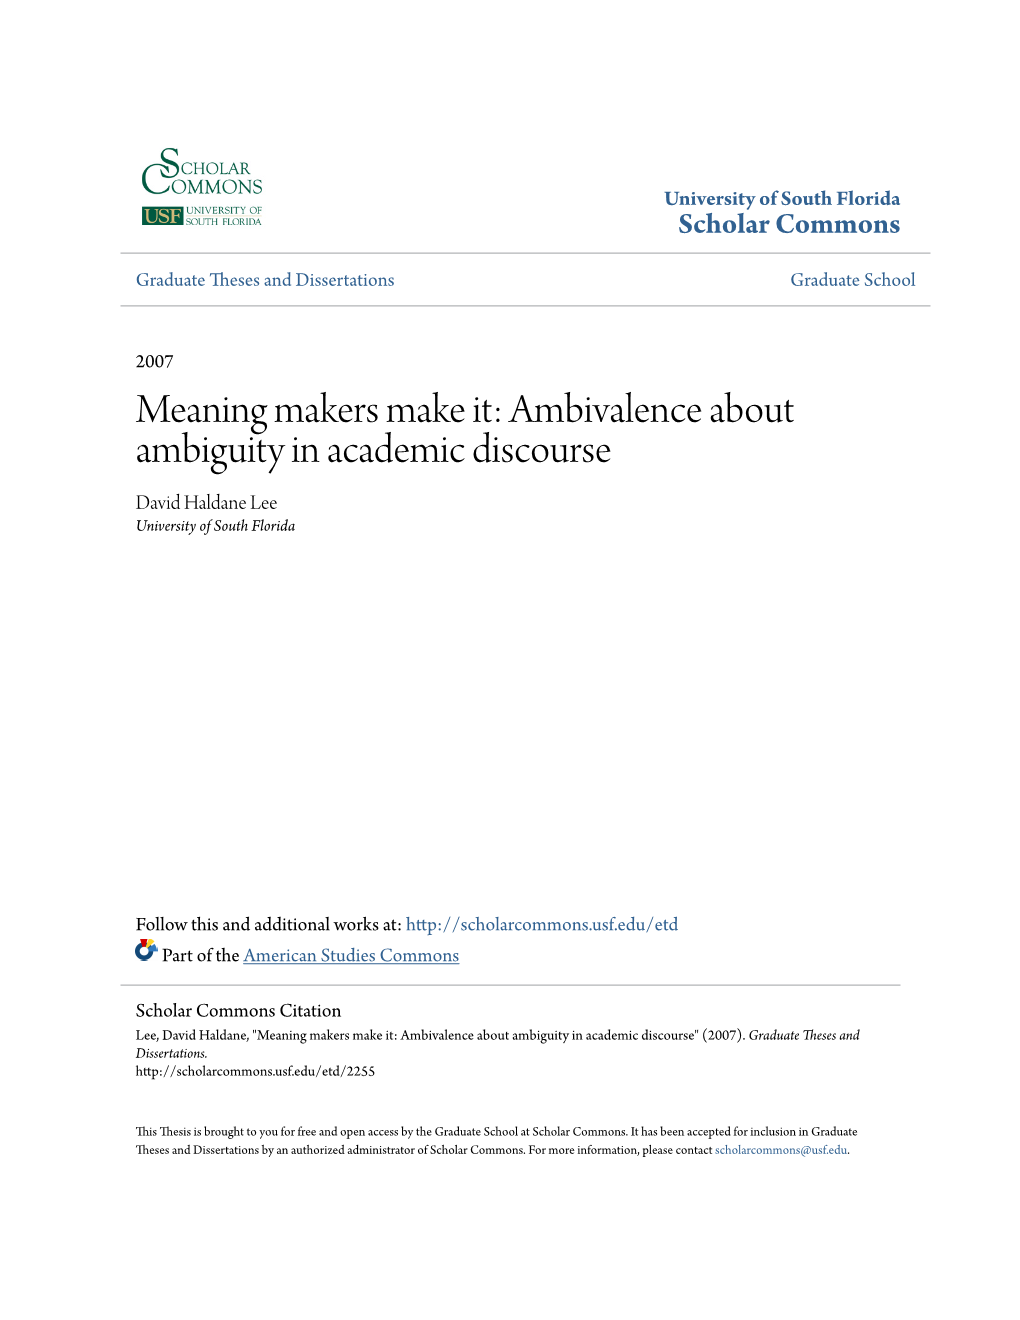 Meaning Makers Make It: Ambivalence About Ambiguity in Academic Discourse David Haldane Lee University of South Florida